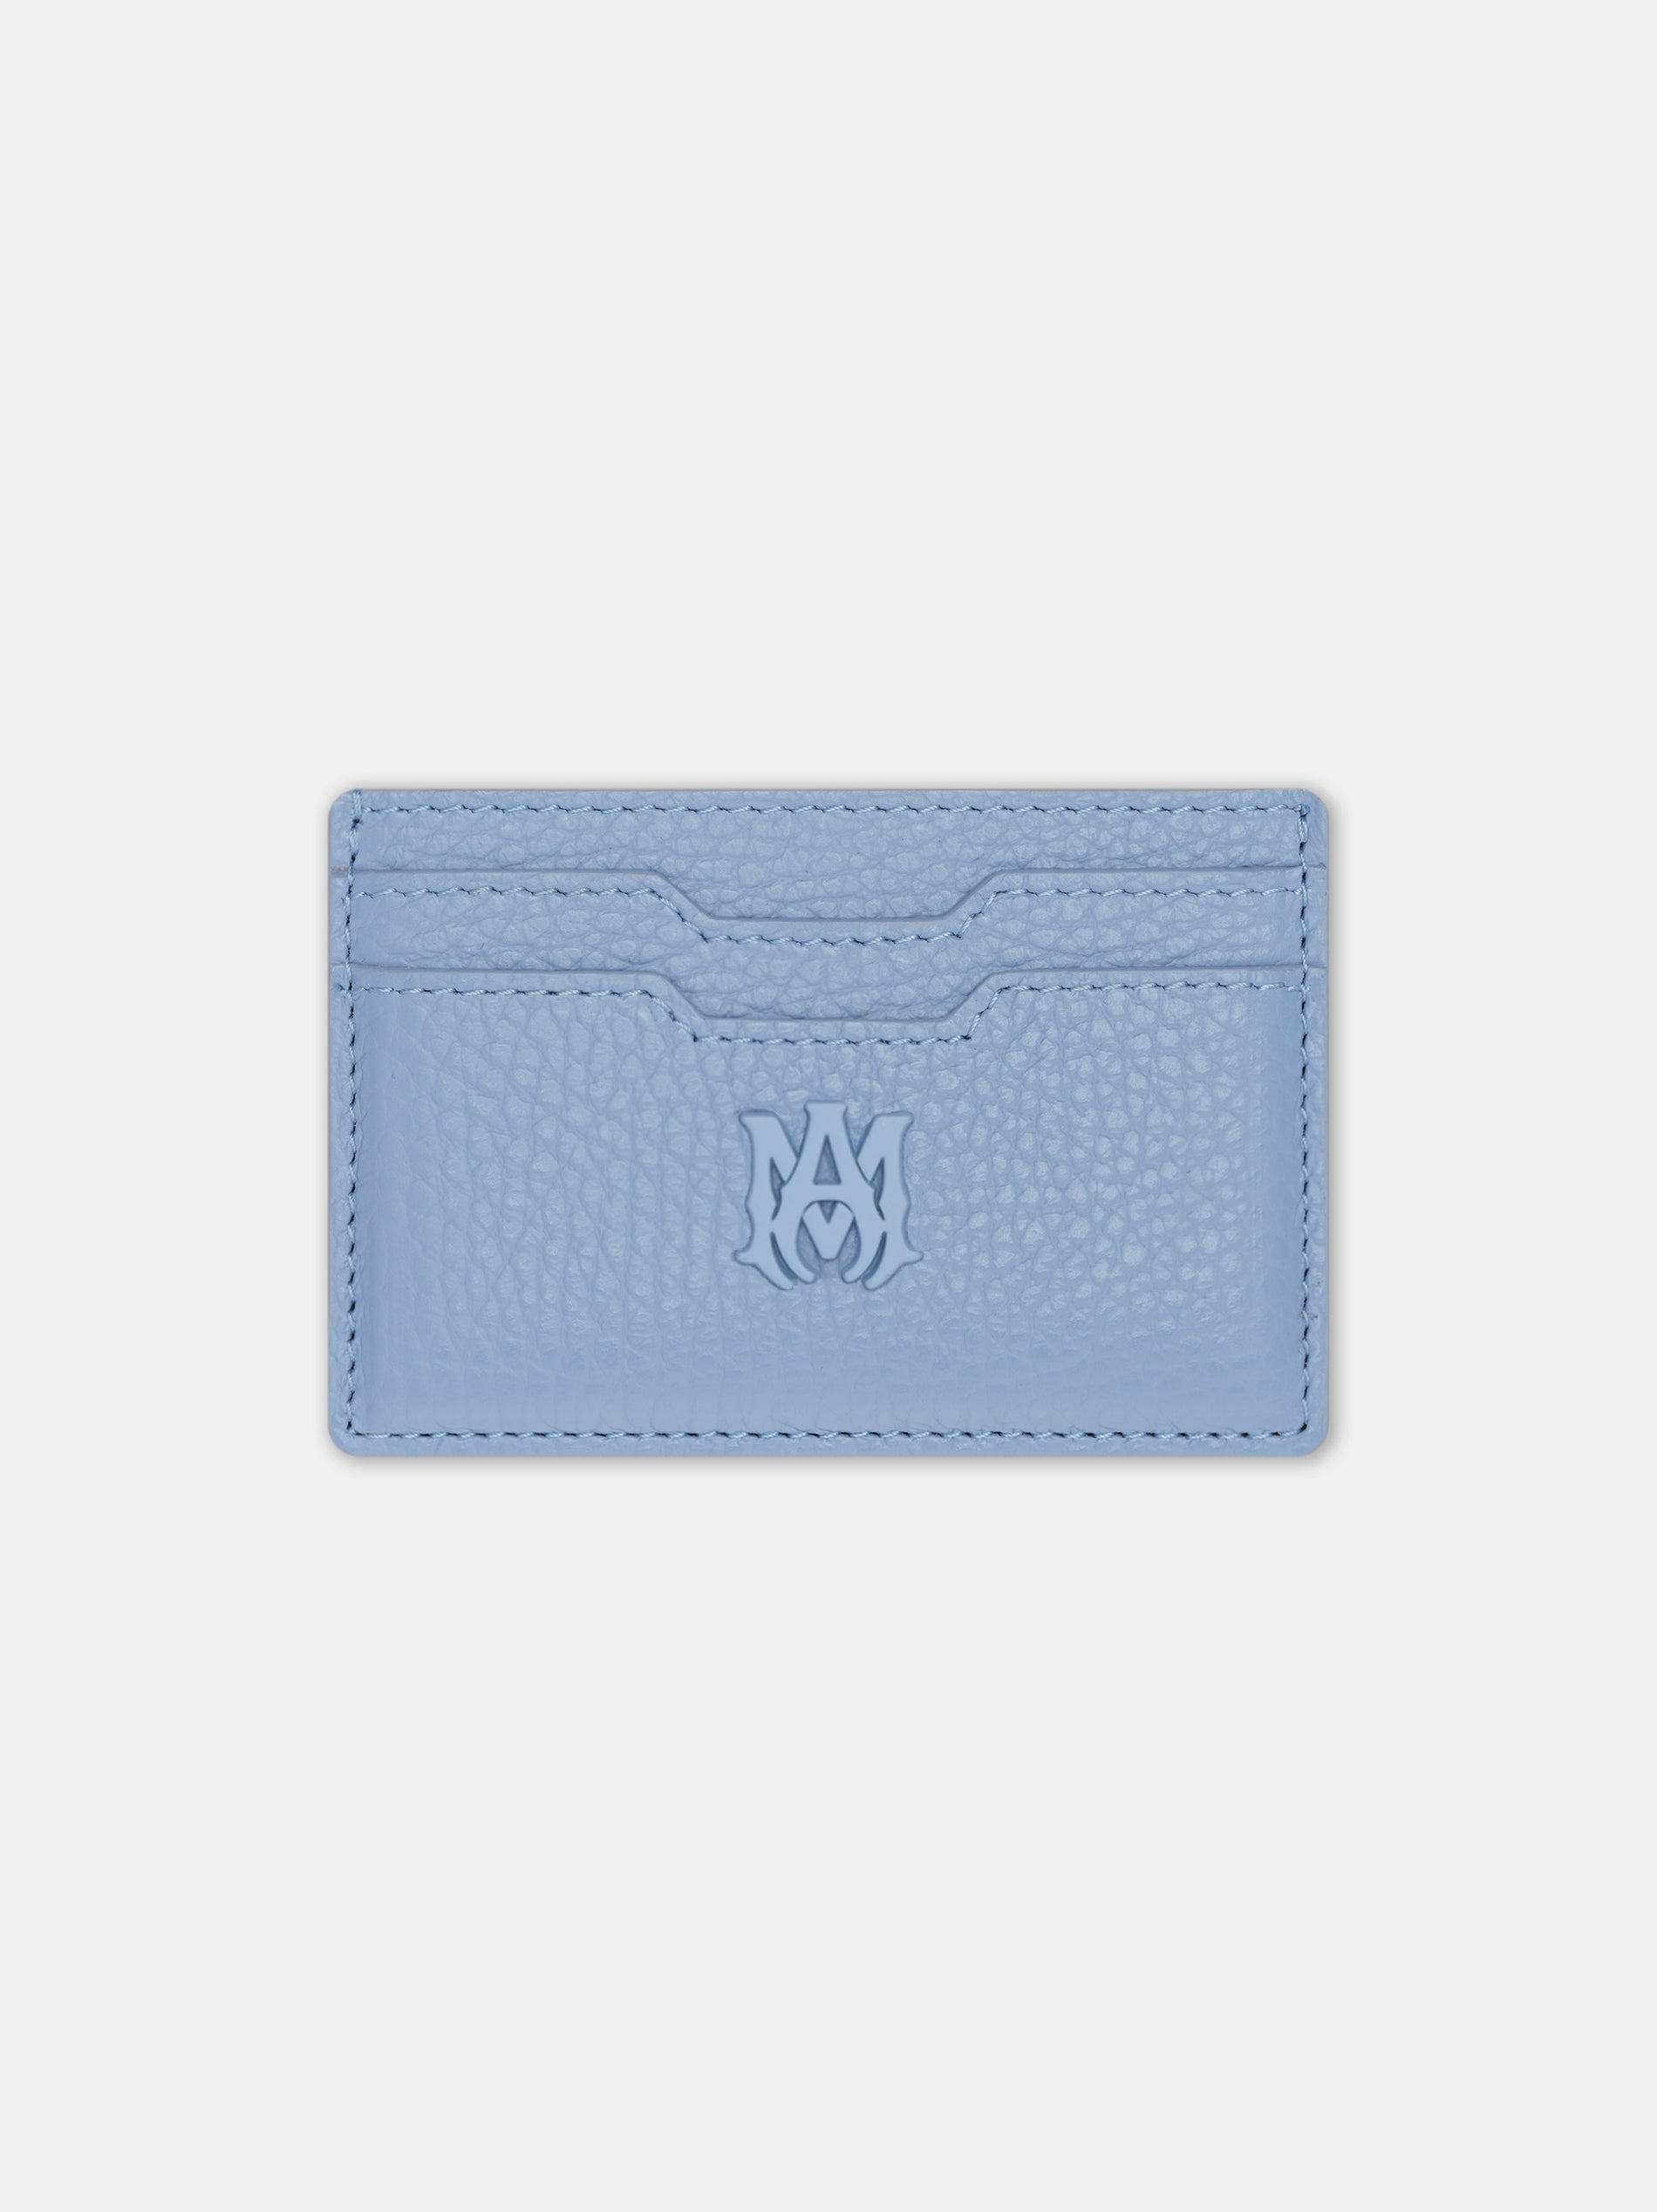 Product MA CARD HOLDER - Cerulean featured image